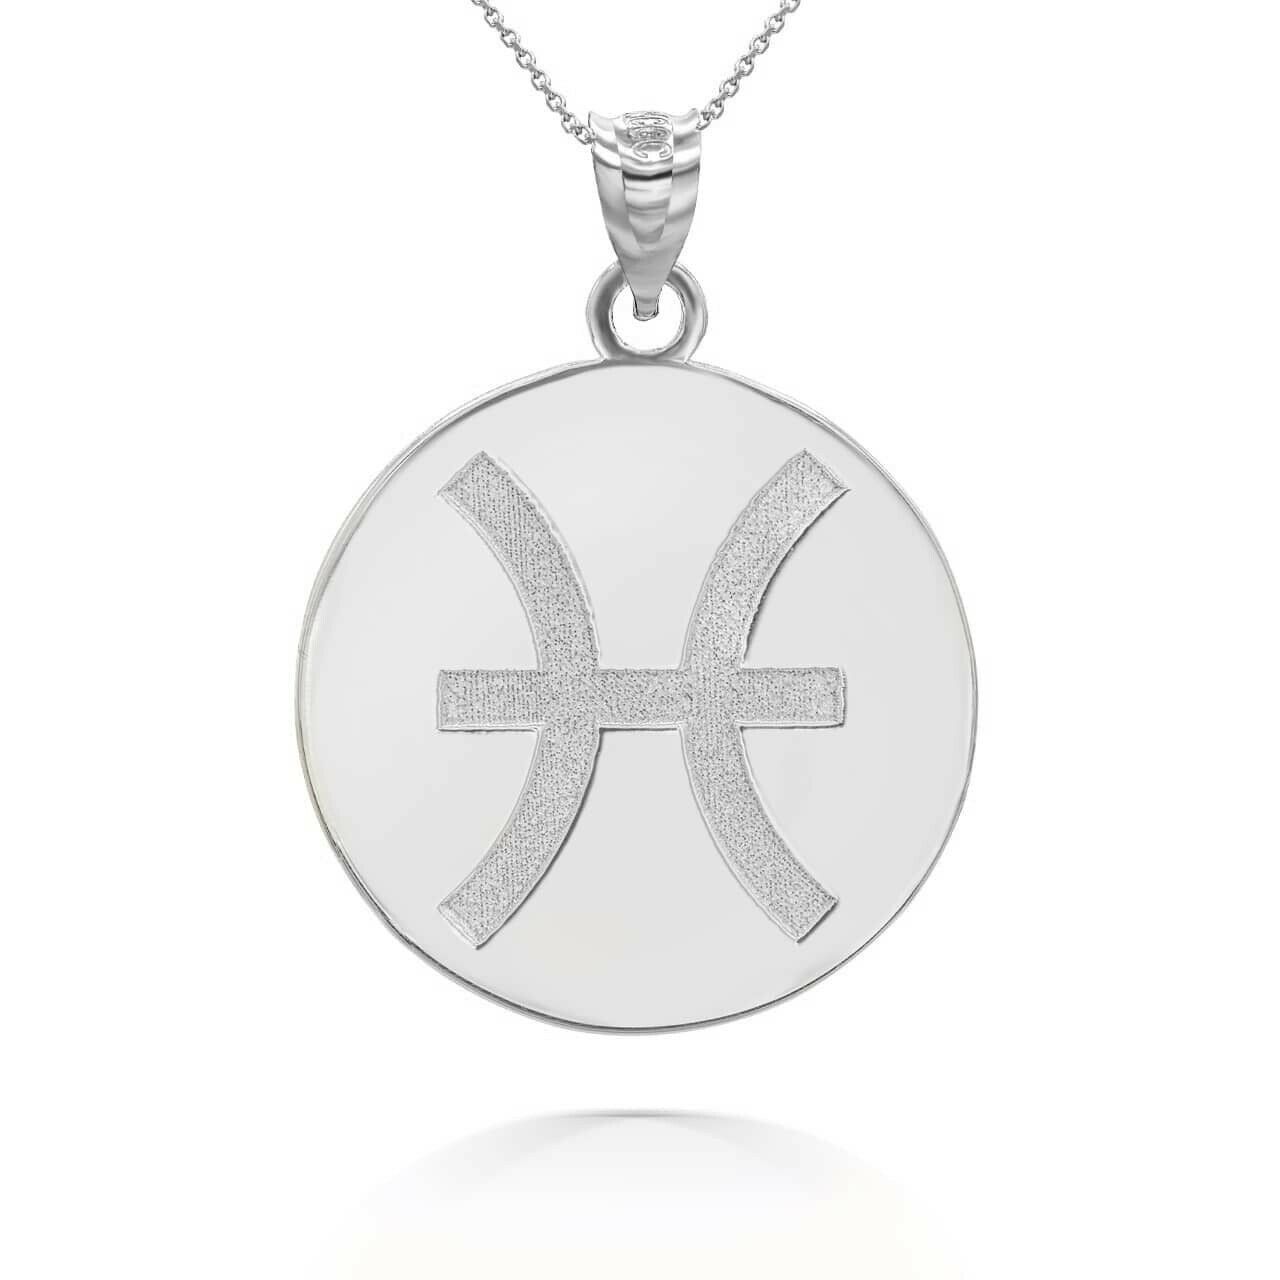 Personalized Engrave Name Zodiac Sign Pisces Round Silver Pendant Necklace